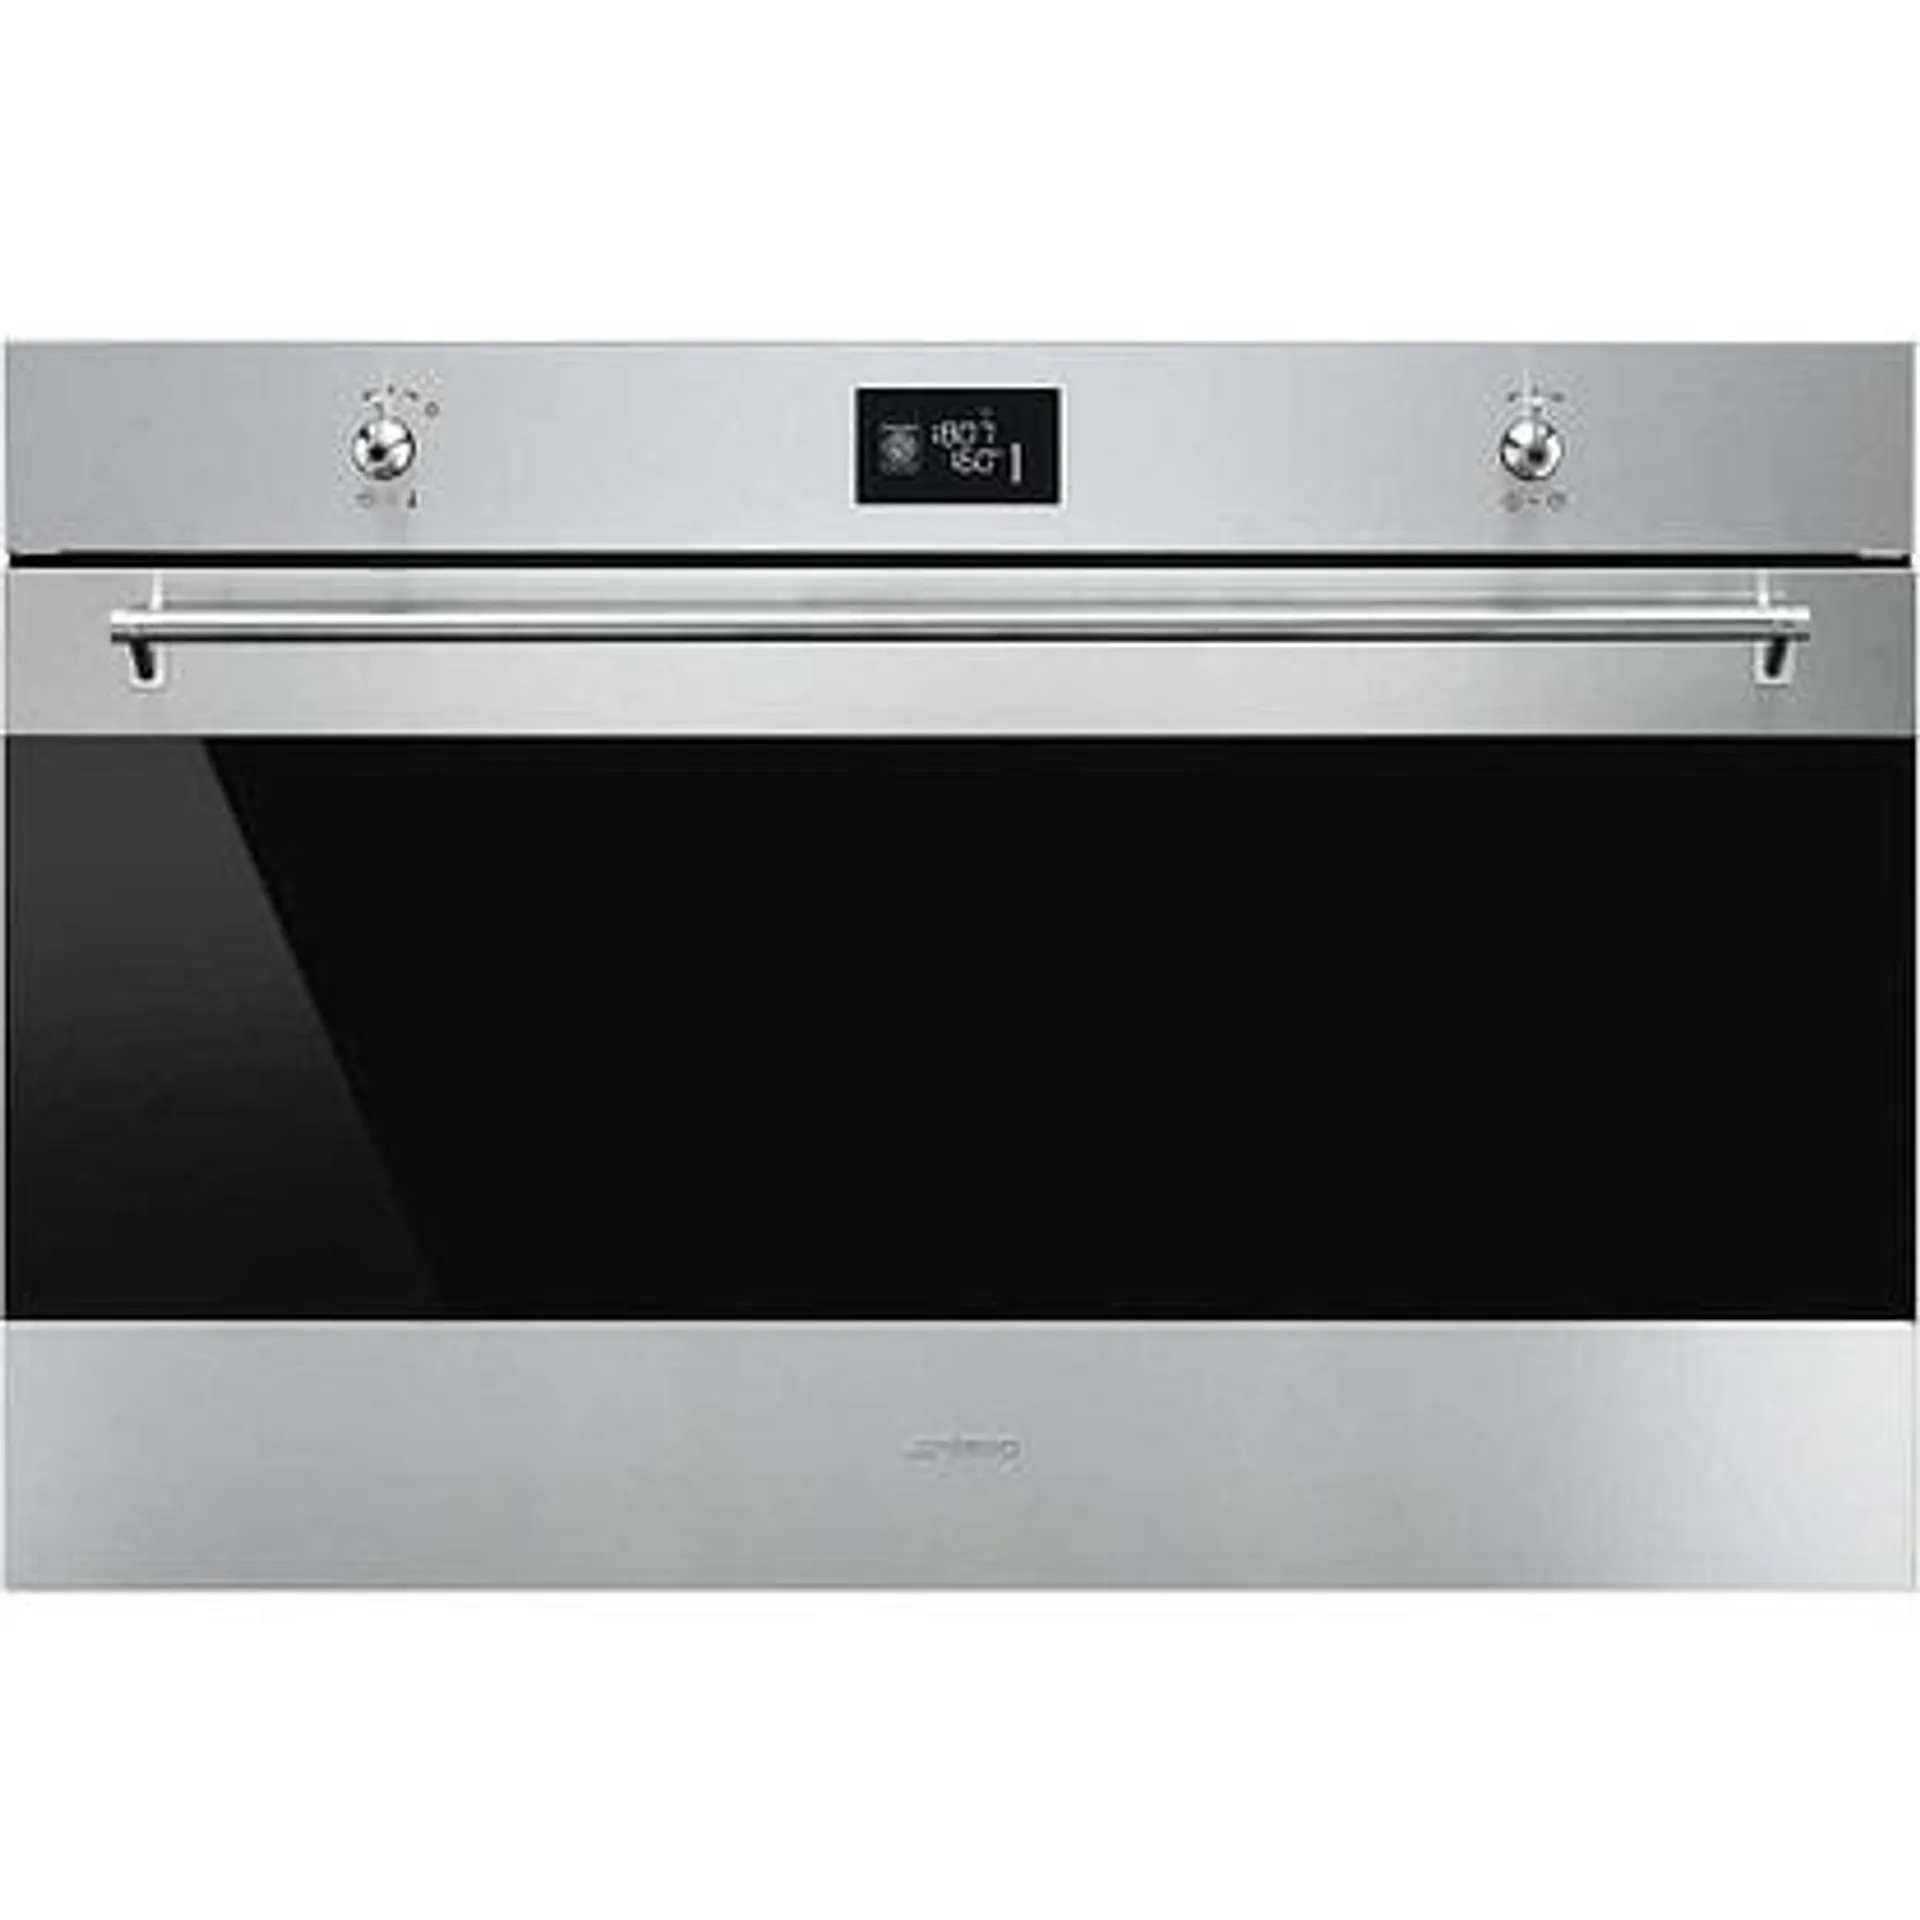 Smeg SF9390X1 90cm Classic Multifunction Single Oven – STAINLESS STEEL